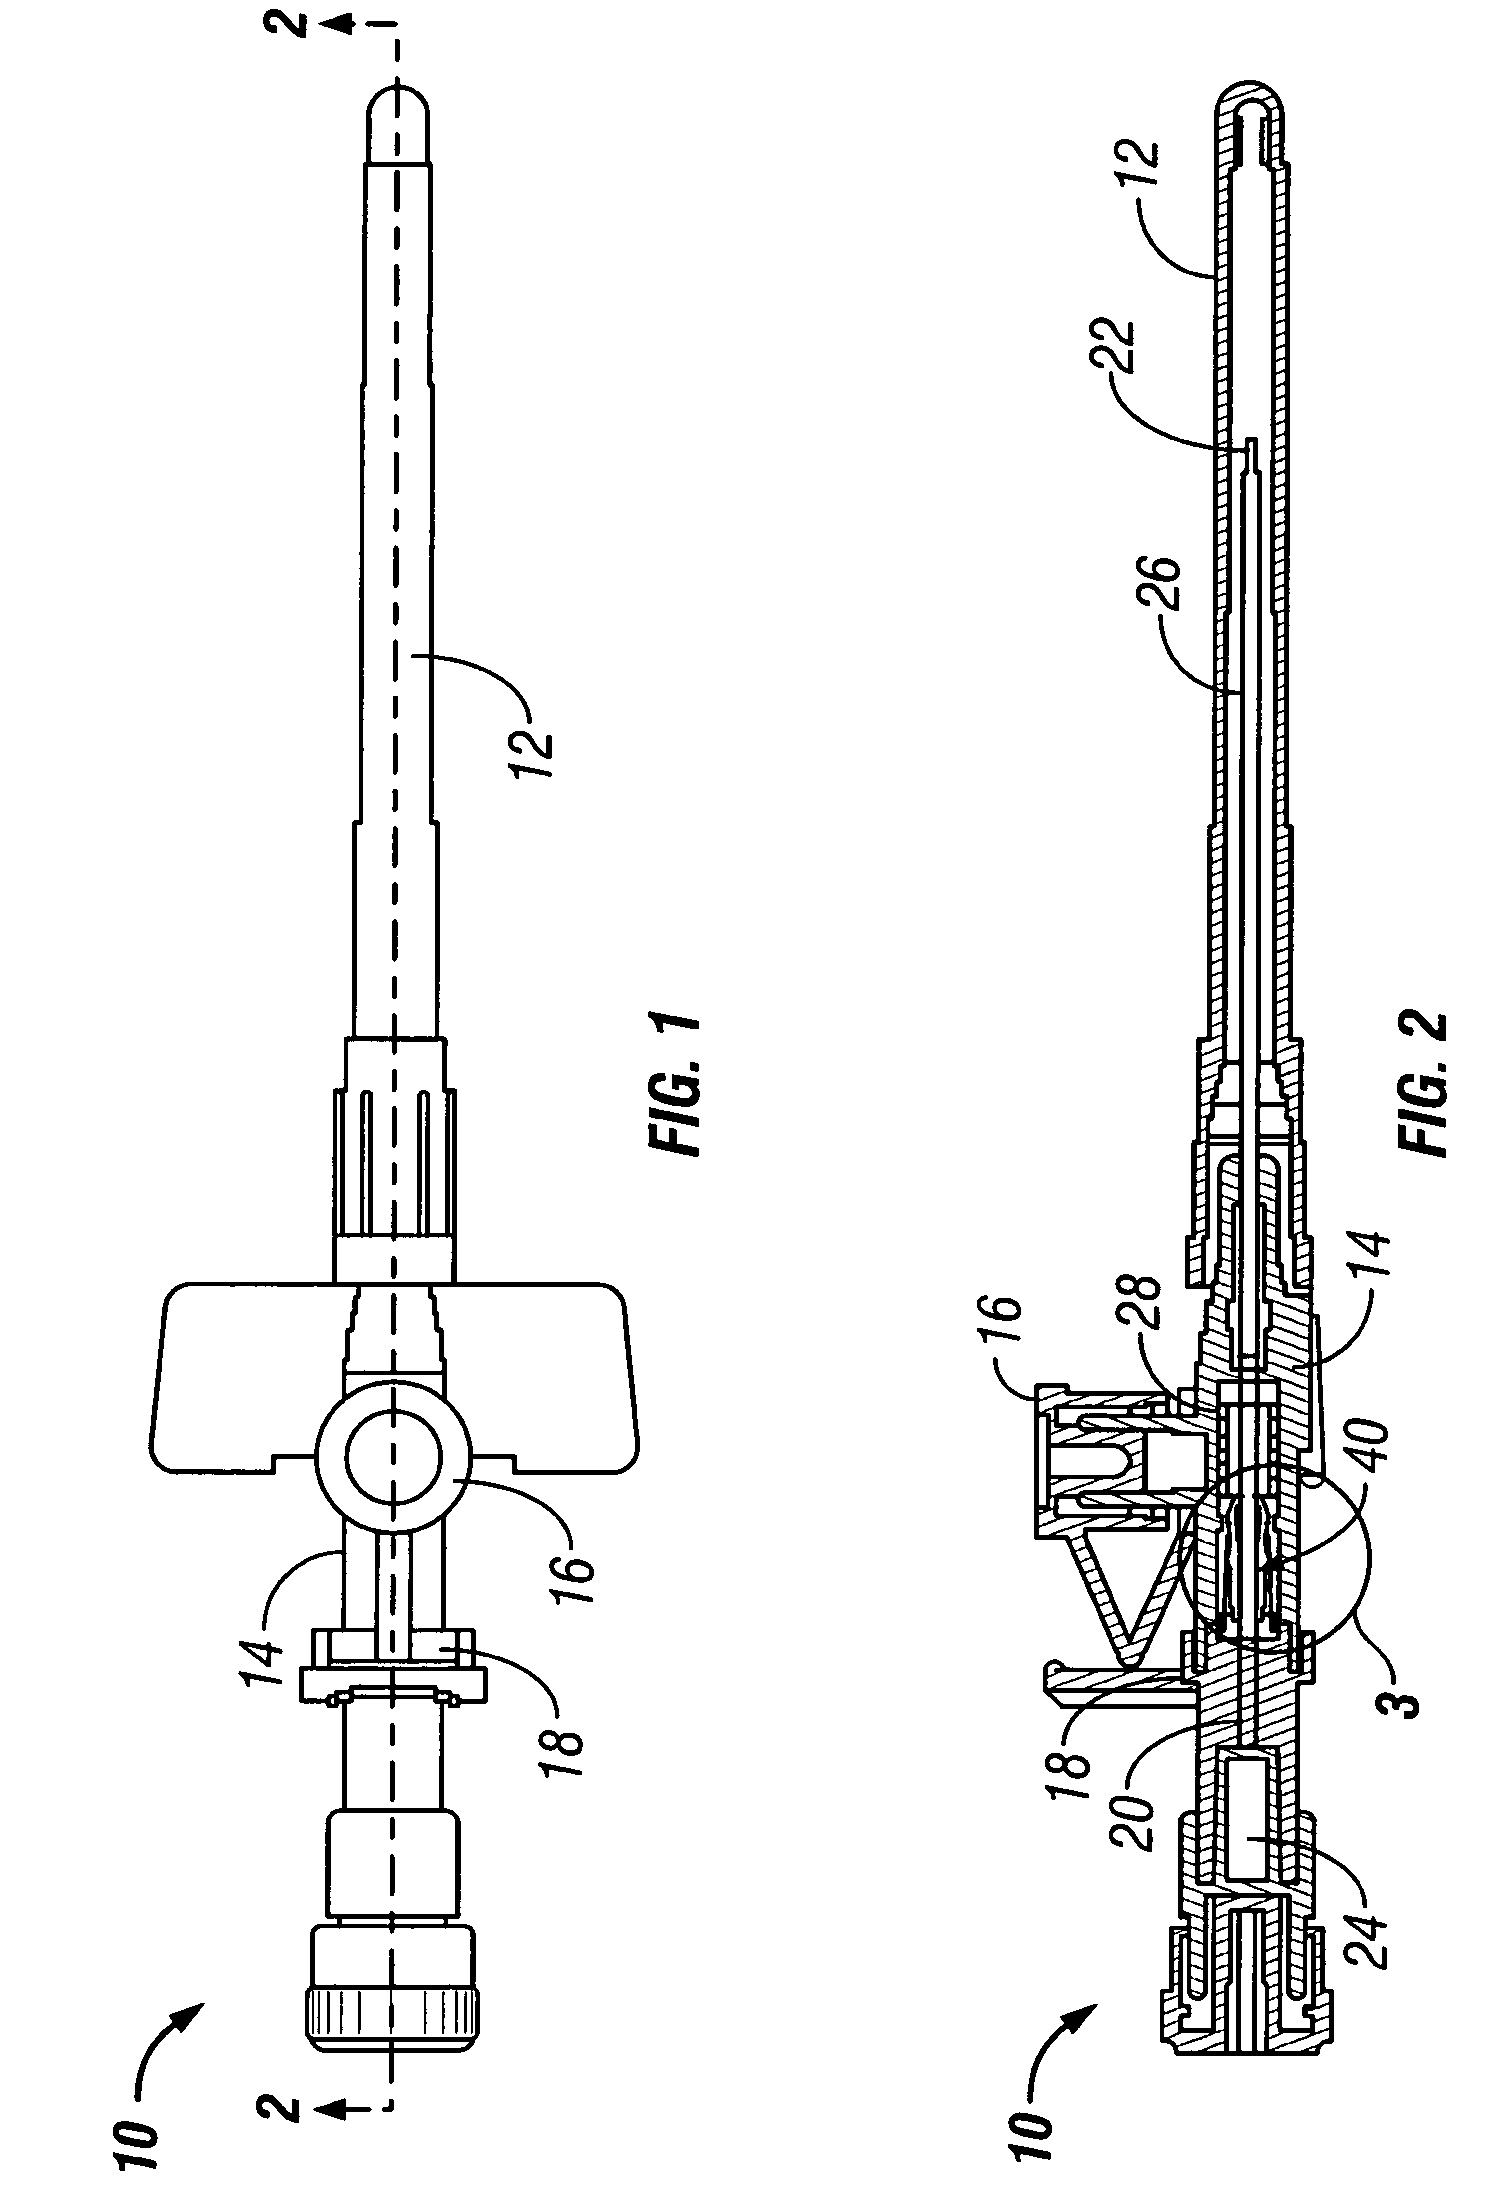 Needle safety device for an intravenous catheter apparatus and method of use